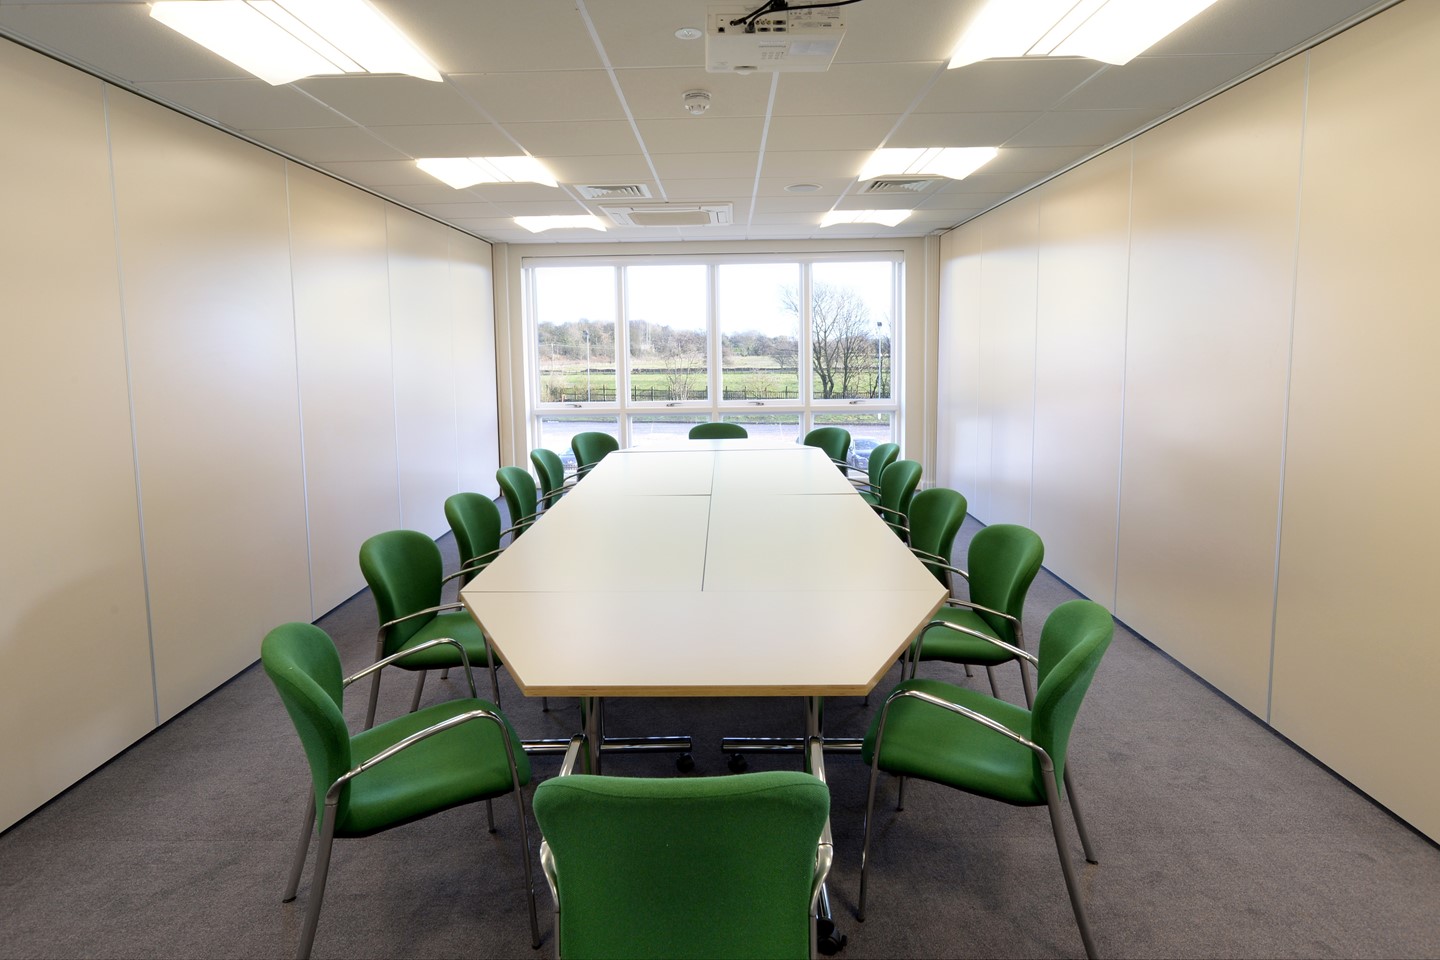 Seminar room with table and chairs